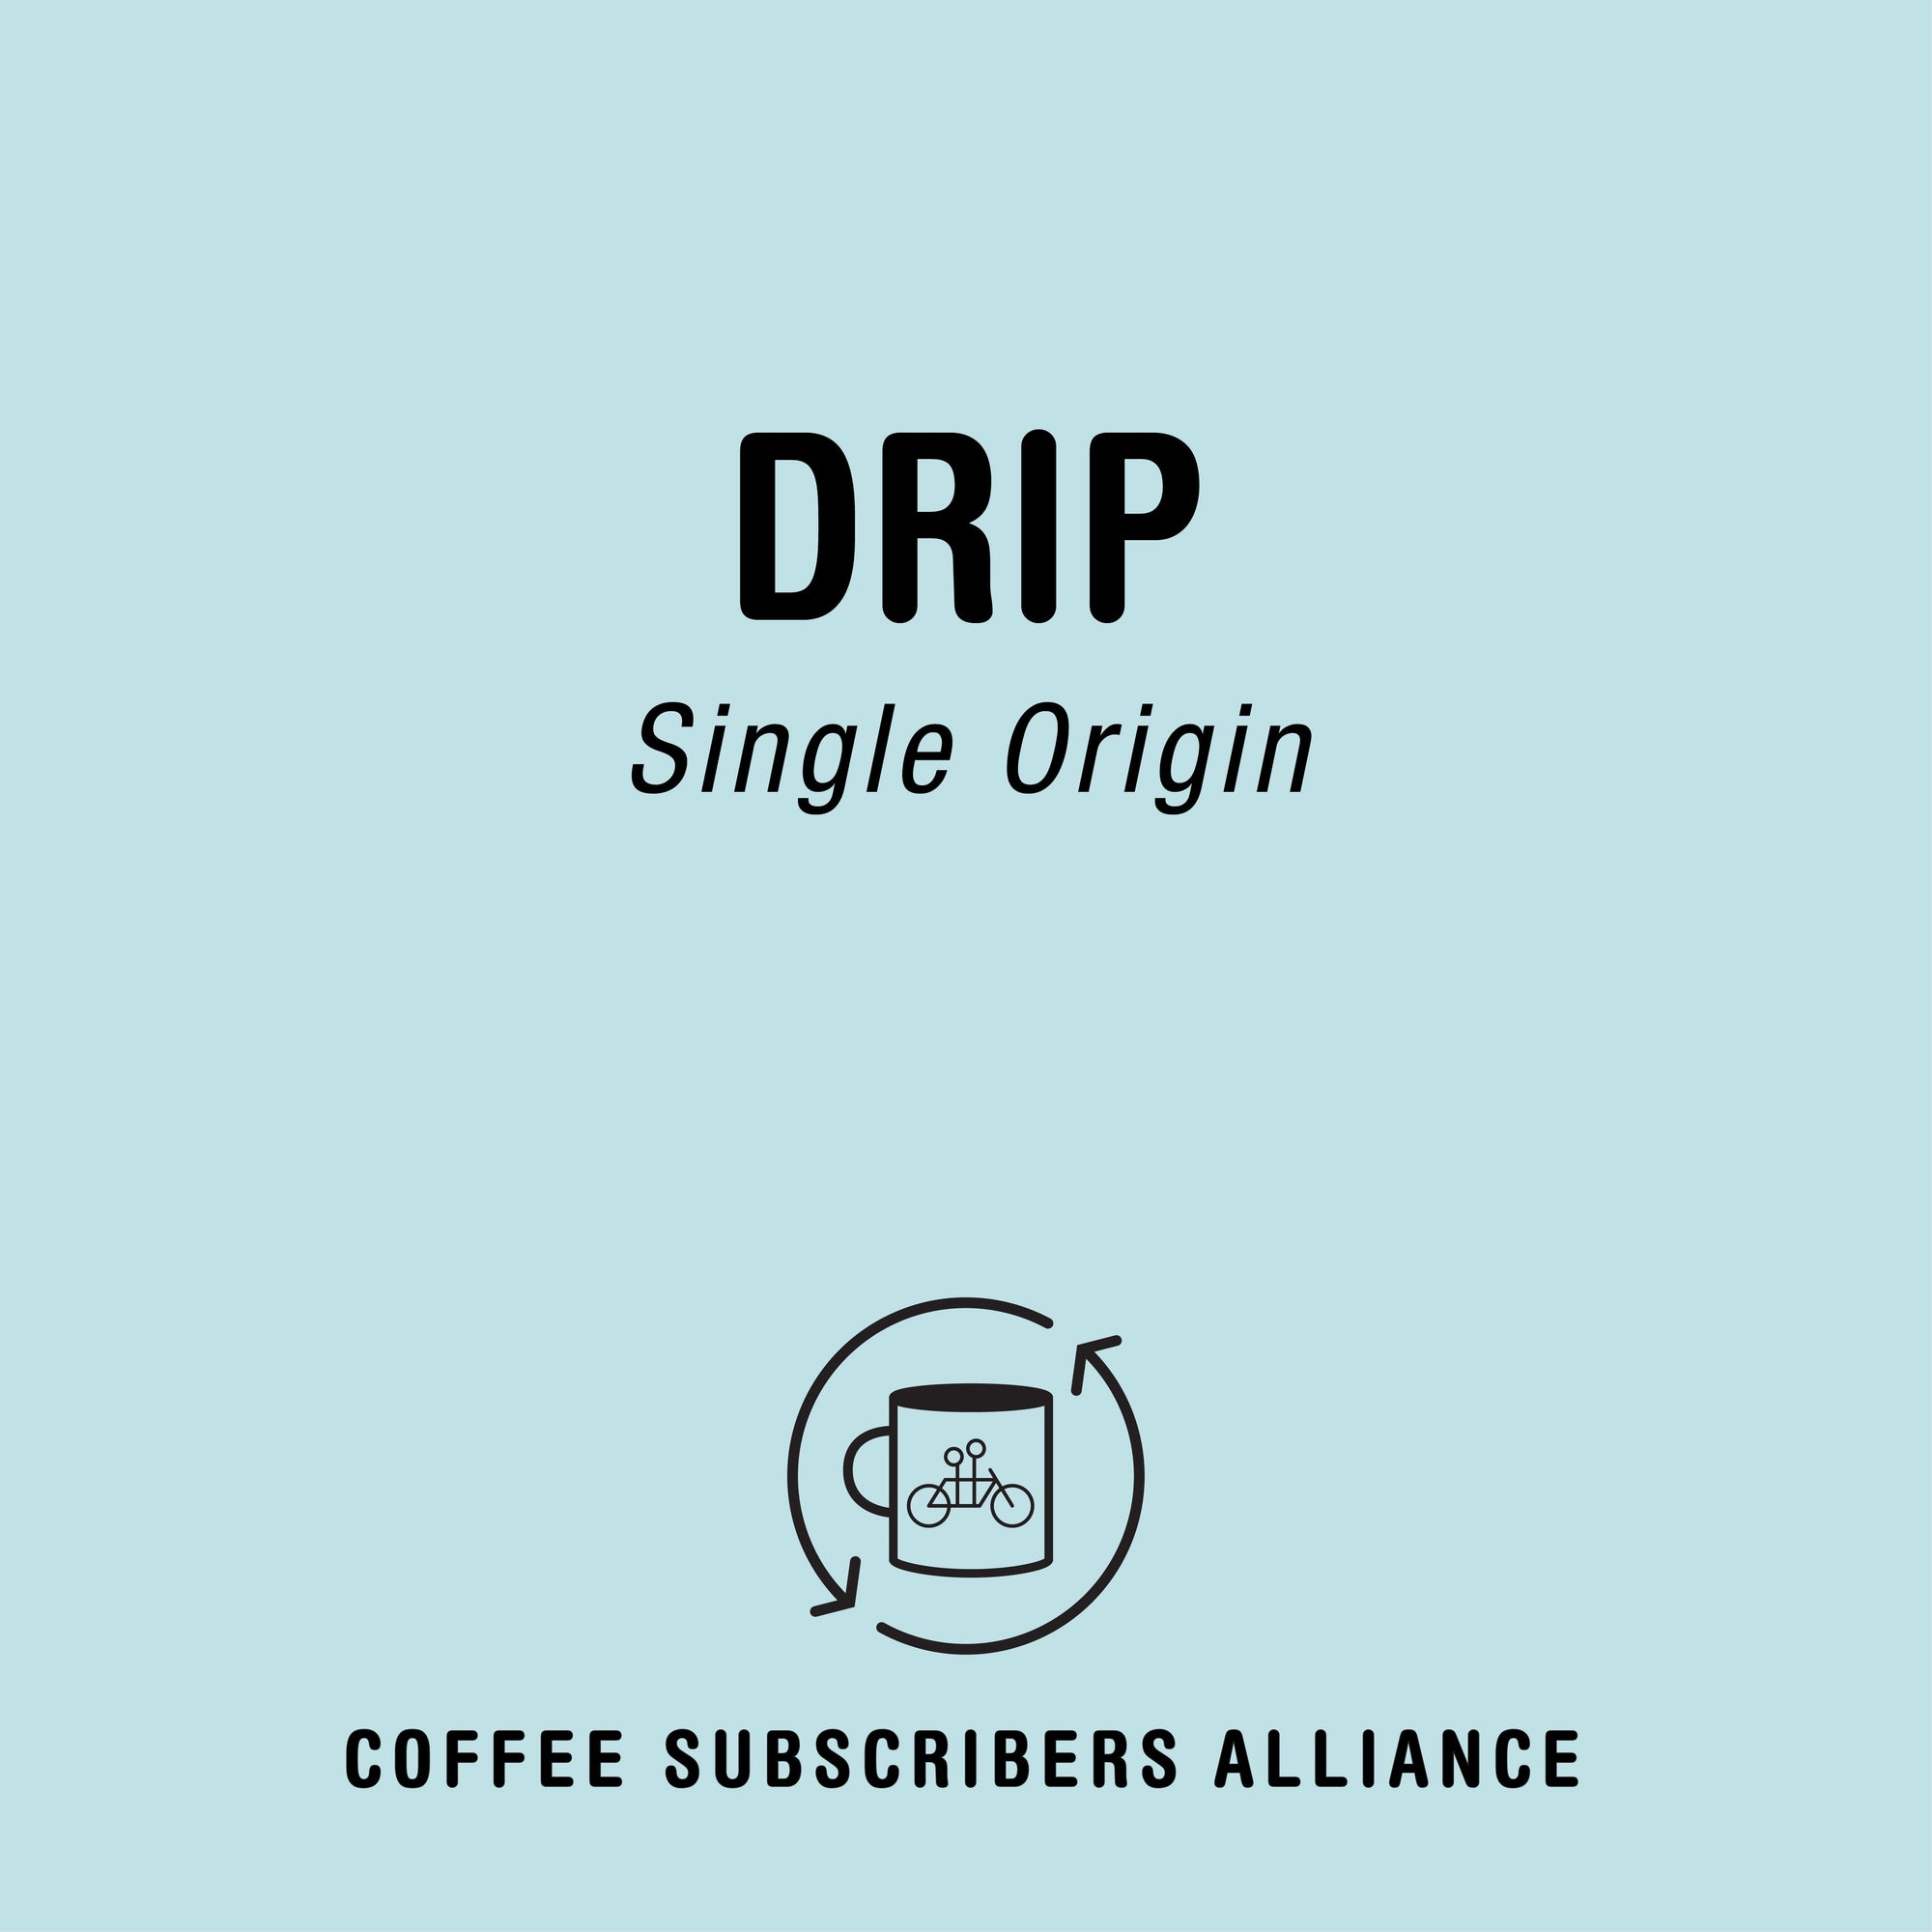 Logo of Tandem's "Drip Subscription Gift - 4 Weeks x 3" featuring the text "Single Origin" beneath the word "drip" and a circular emblem with a coffee cup containing three coffee beans. The background is solid.